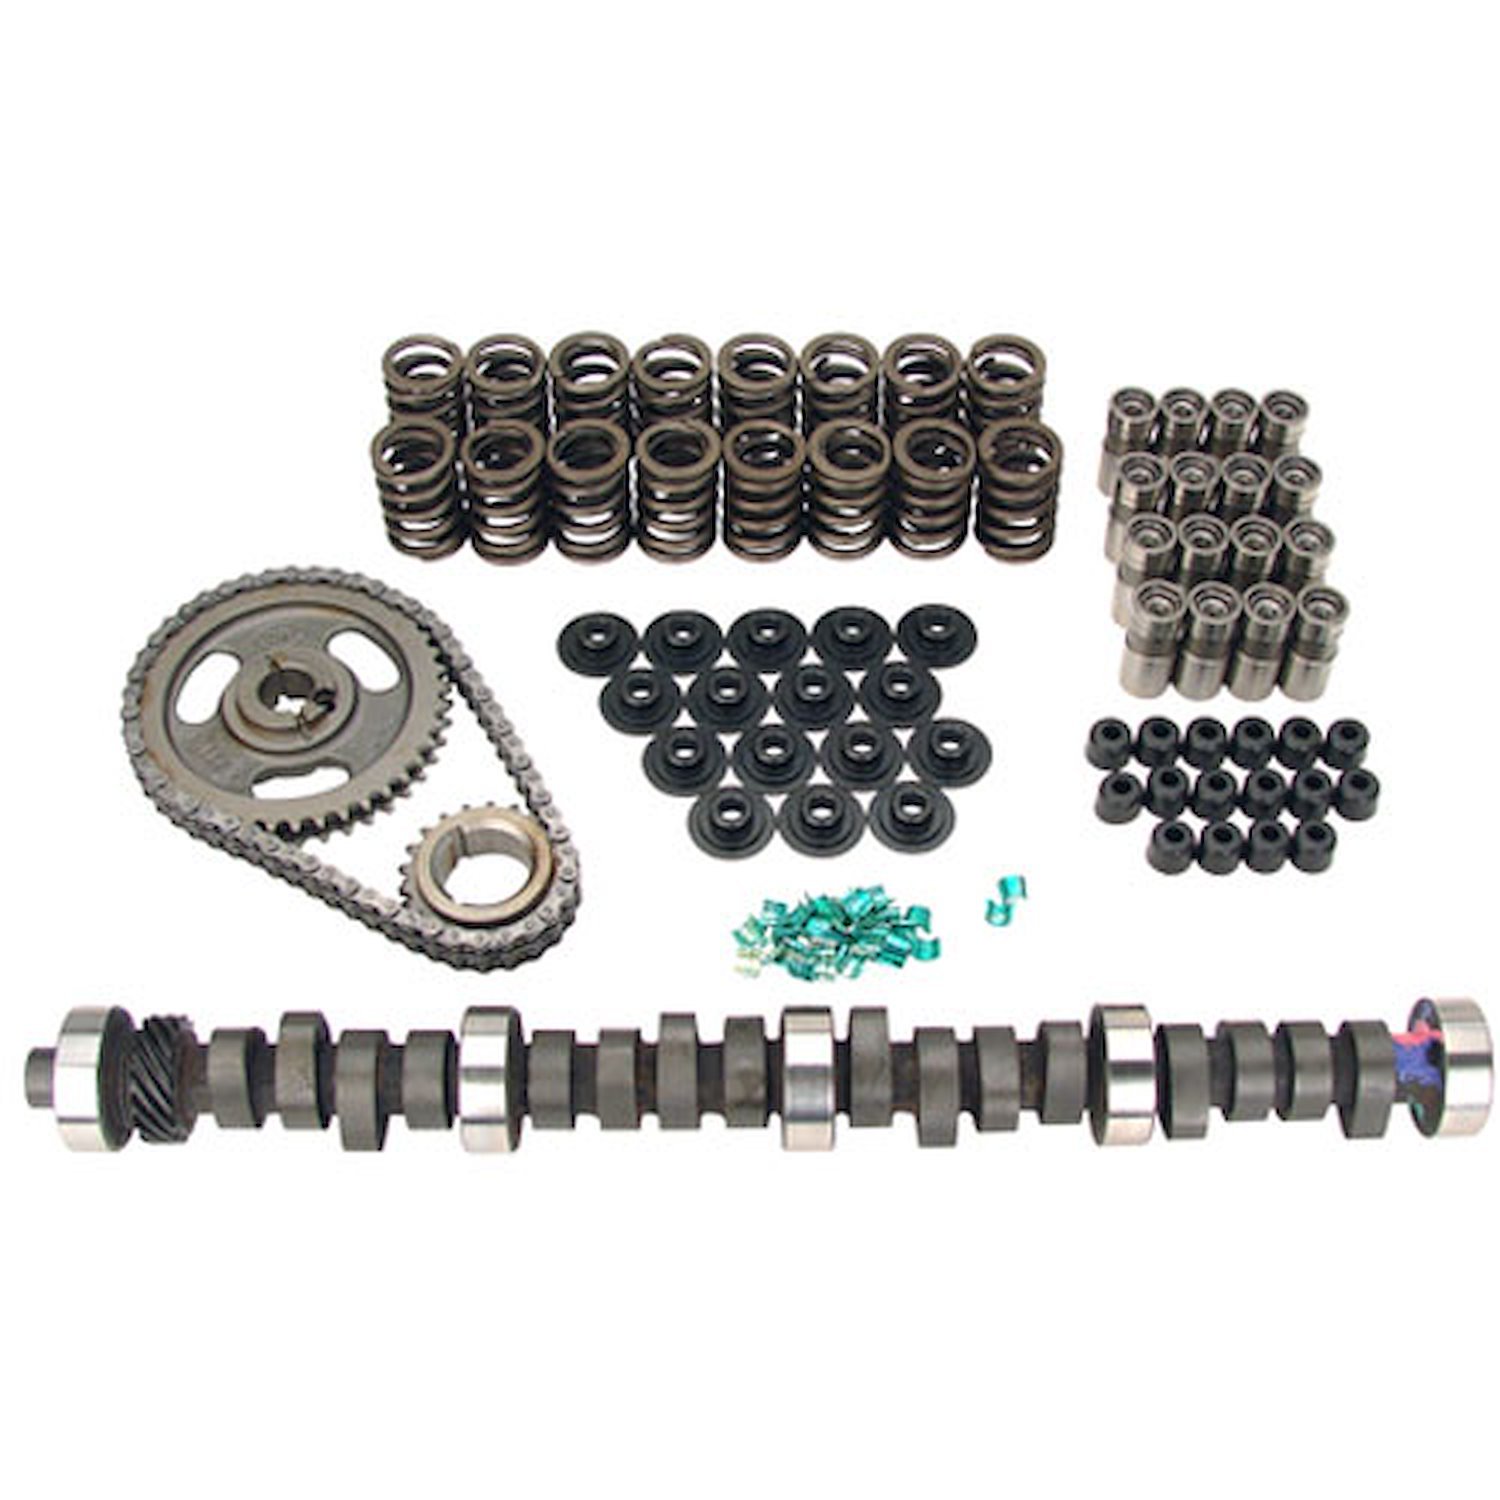 High Energy 268H Hydraulic Flat Tappet Camshaft Complete Kit Lift: .494" /.494" Duration: 268°/268° RPM Range: 1500-5500